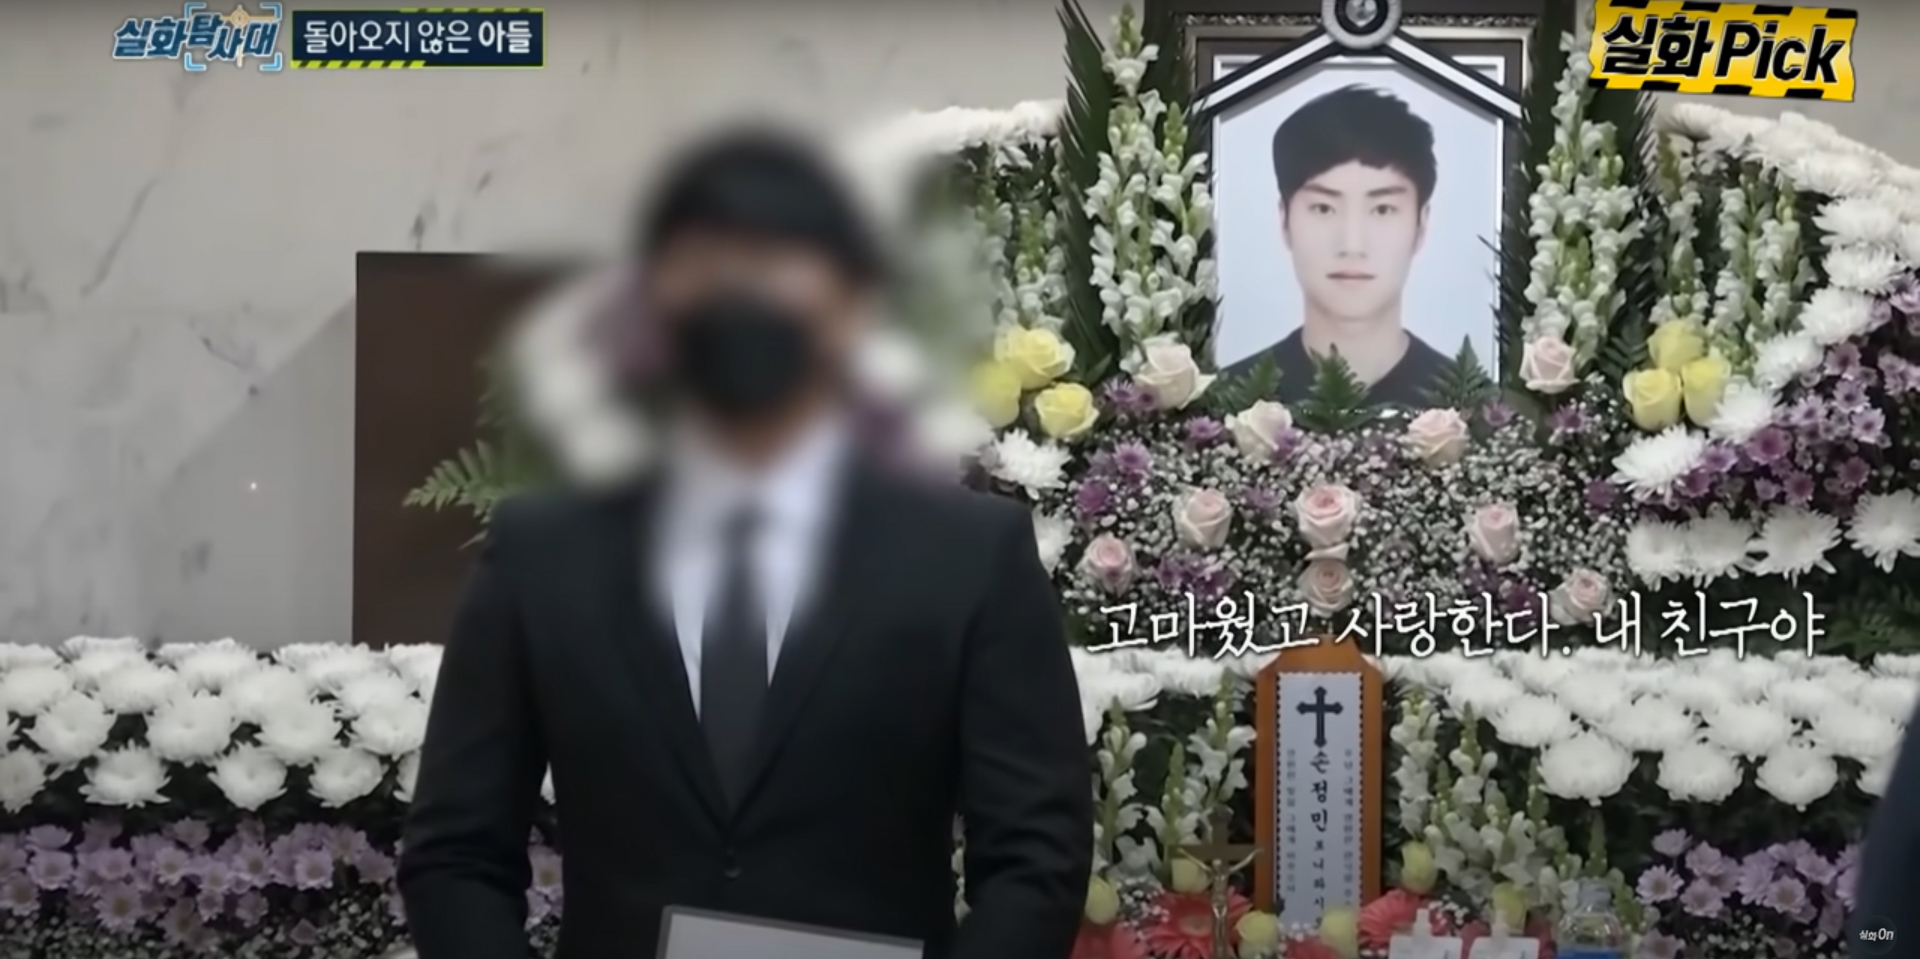 unsolved crimes in korea - jungmin funeral